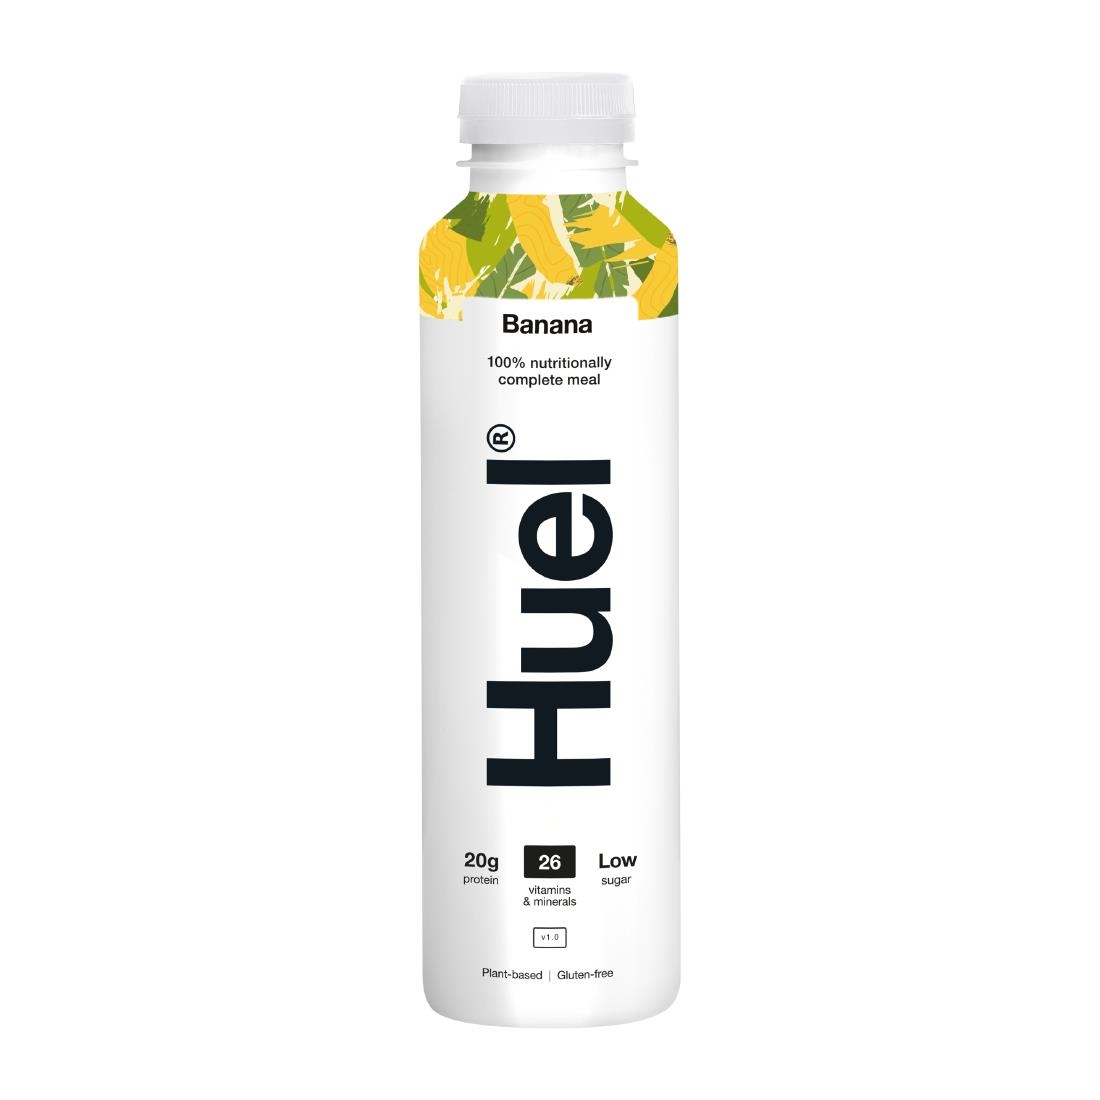 HUEL 100 Nutritionally Complete Meal Drink - Banana 500ml Pack of 8 (HS543)